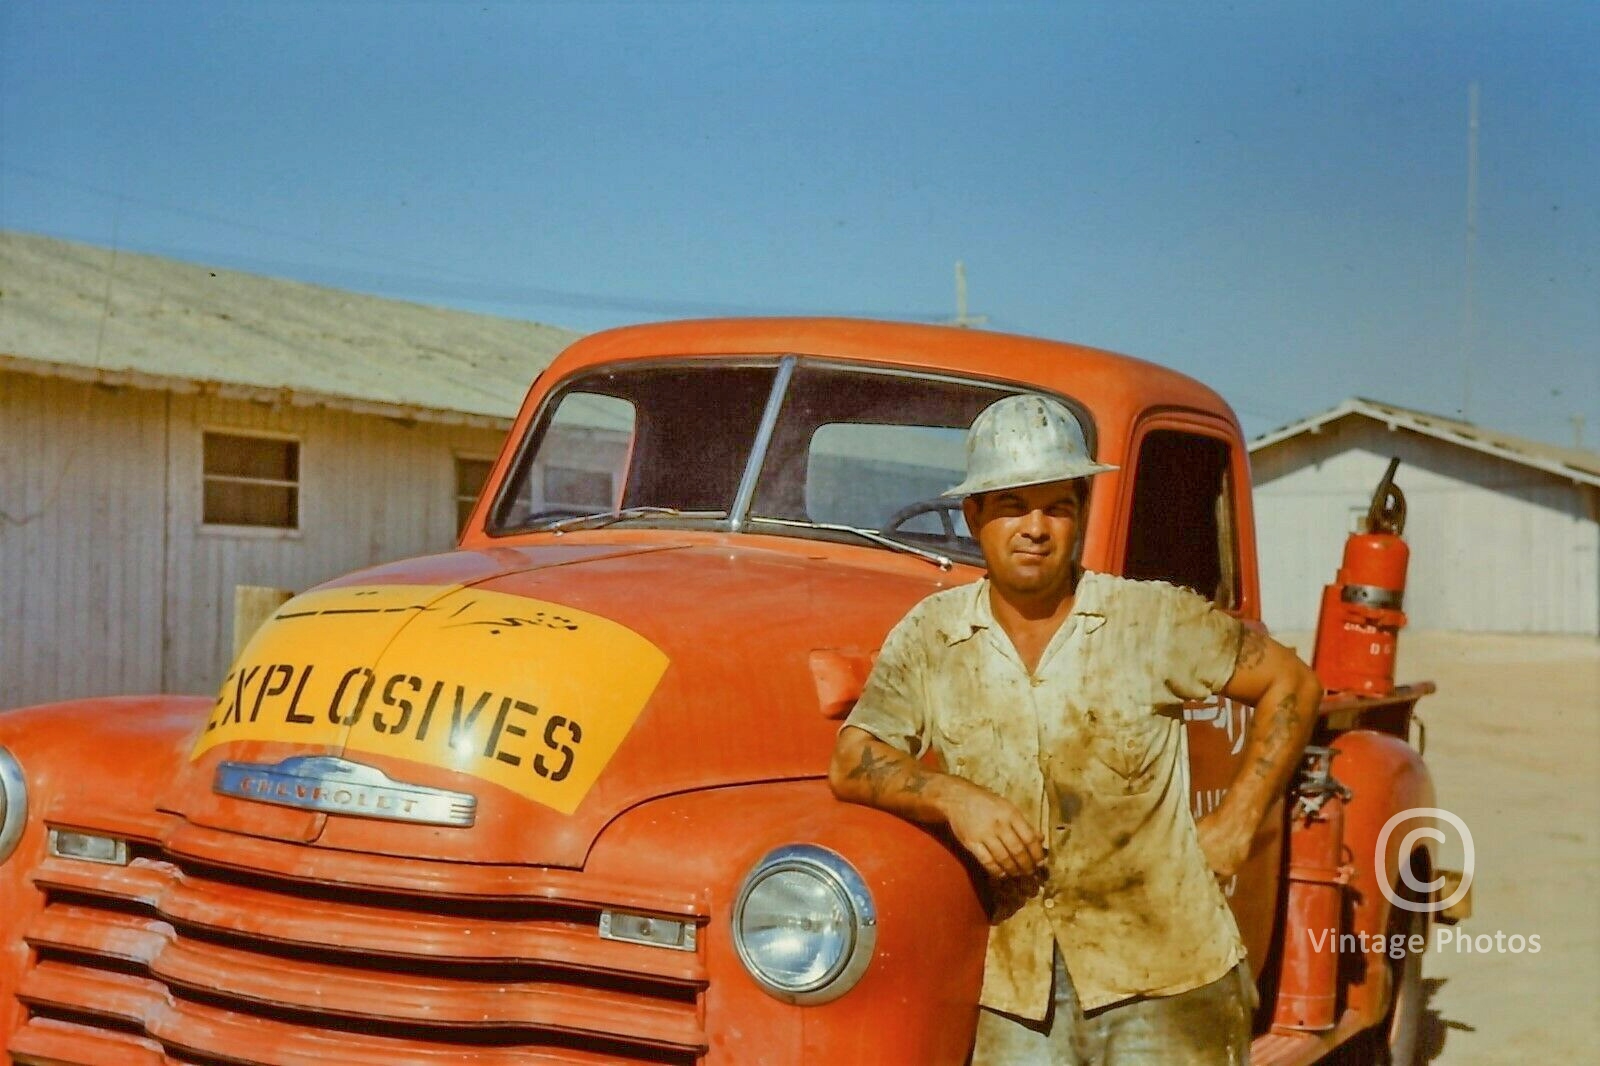 1950s Aramco Oil Company - Chevrolet Explosives Truck and Worker